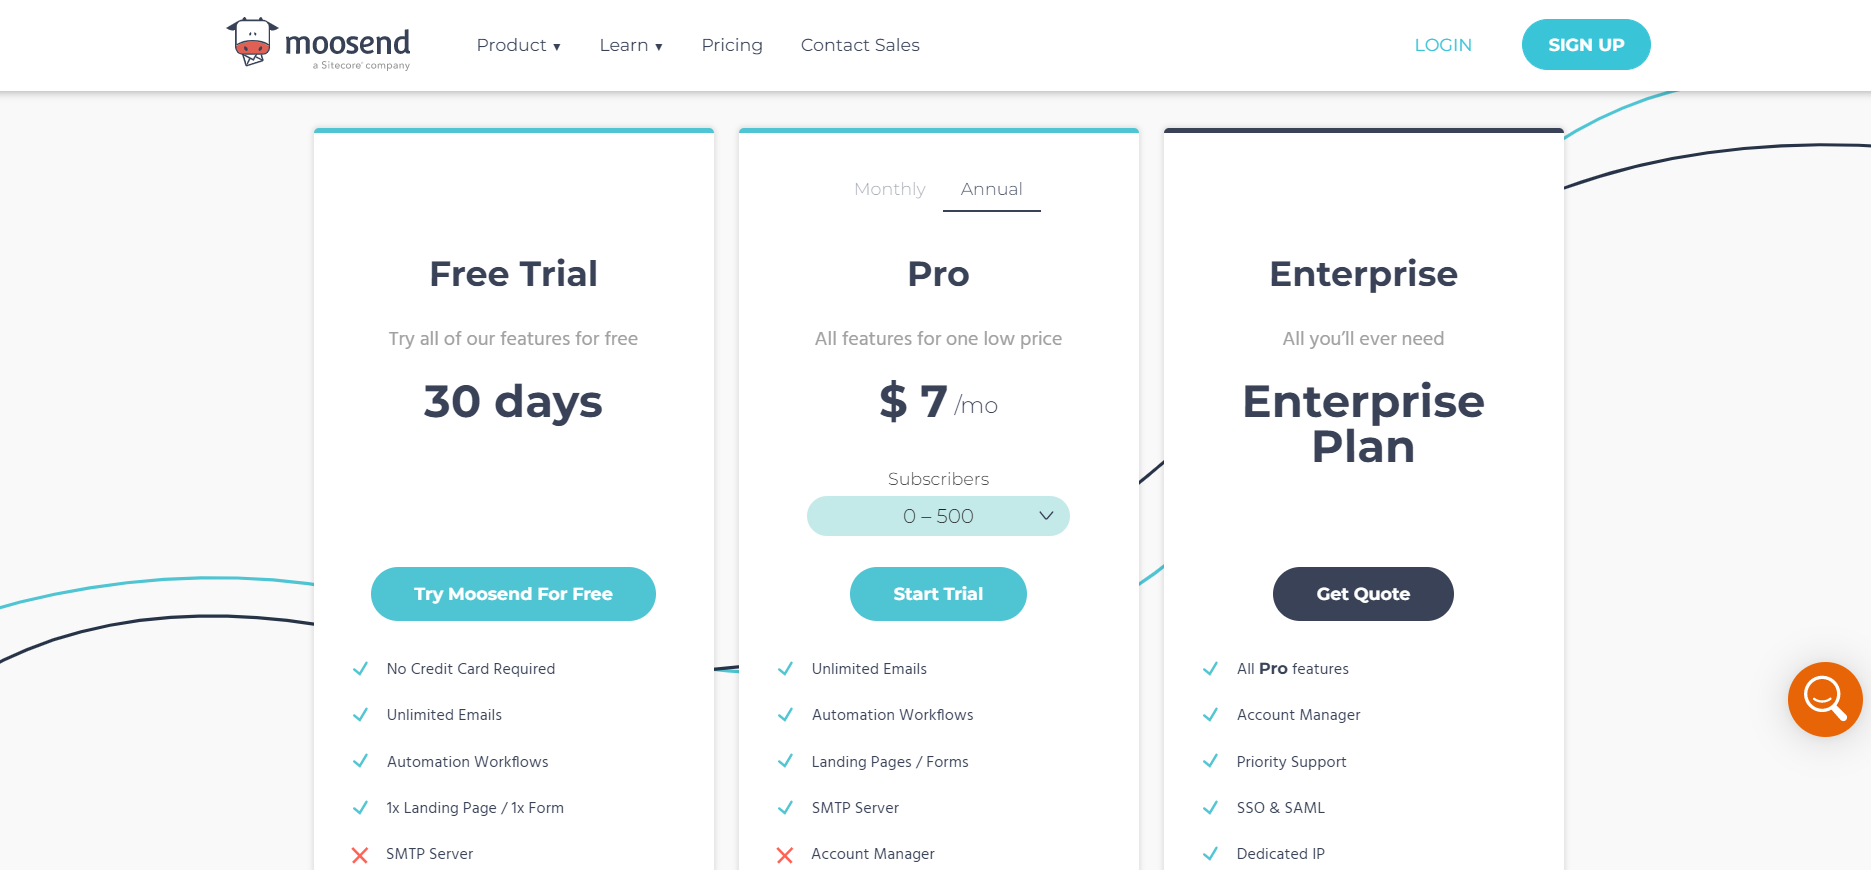 Pricing/Cost for subscribers | Free Plan and Paid Plans | Includes Customer Support | Templates and Tools for Business | Moosend Logo